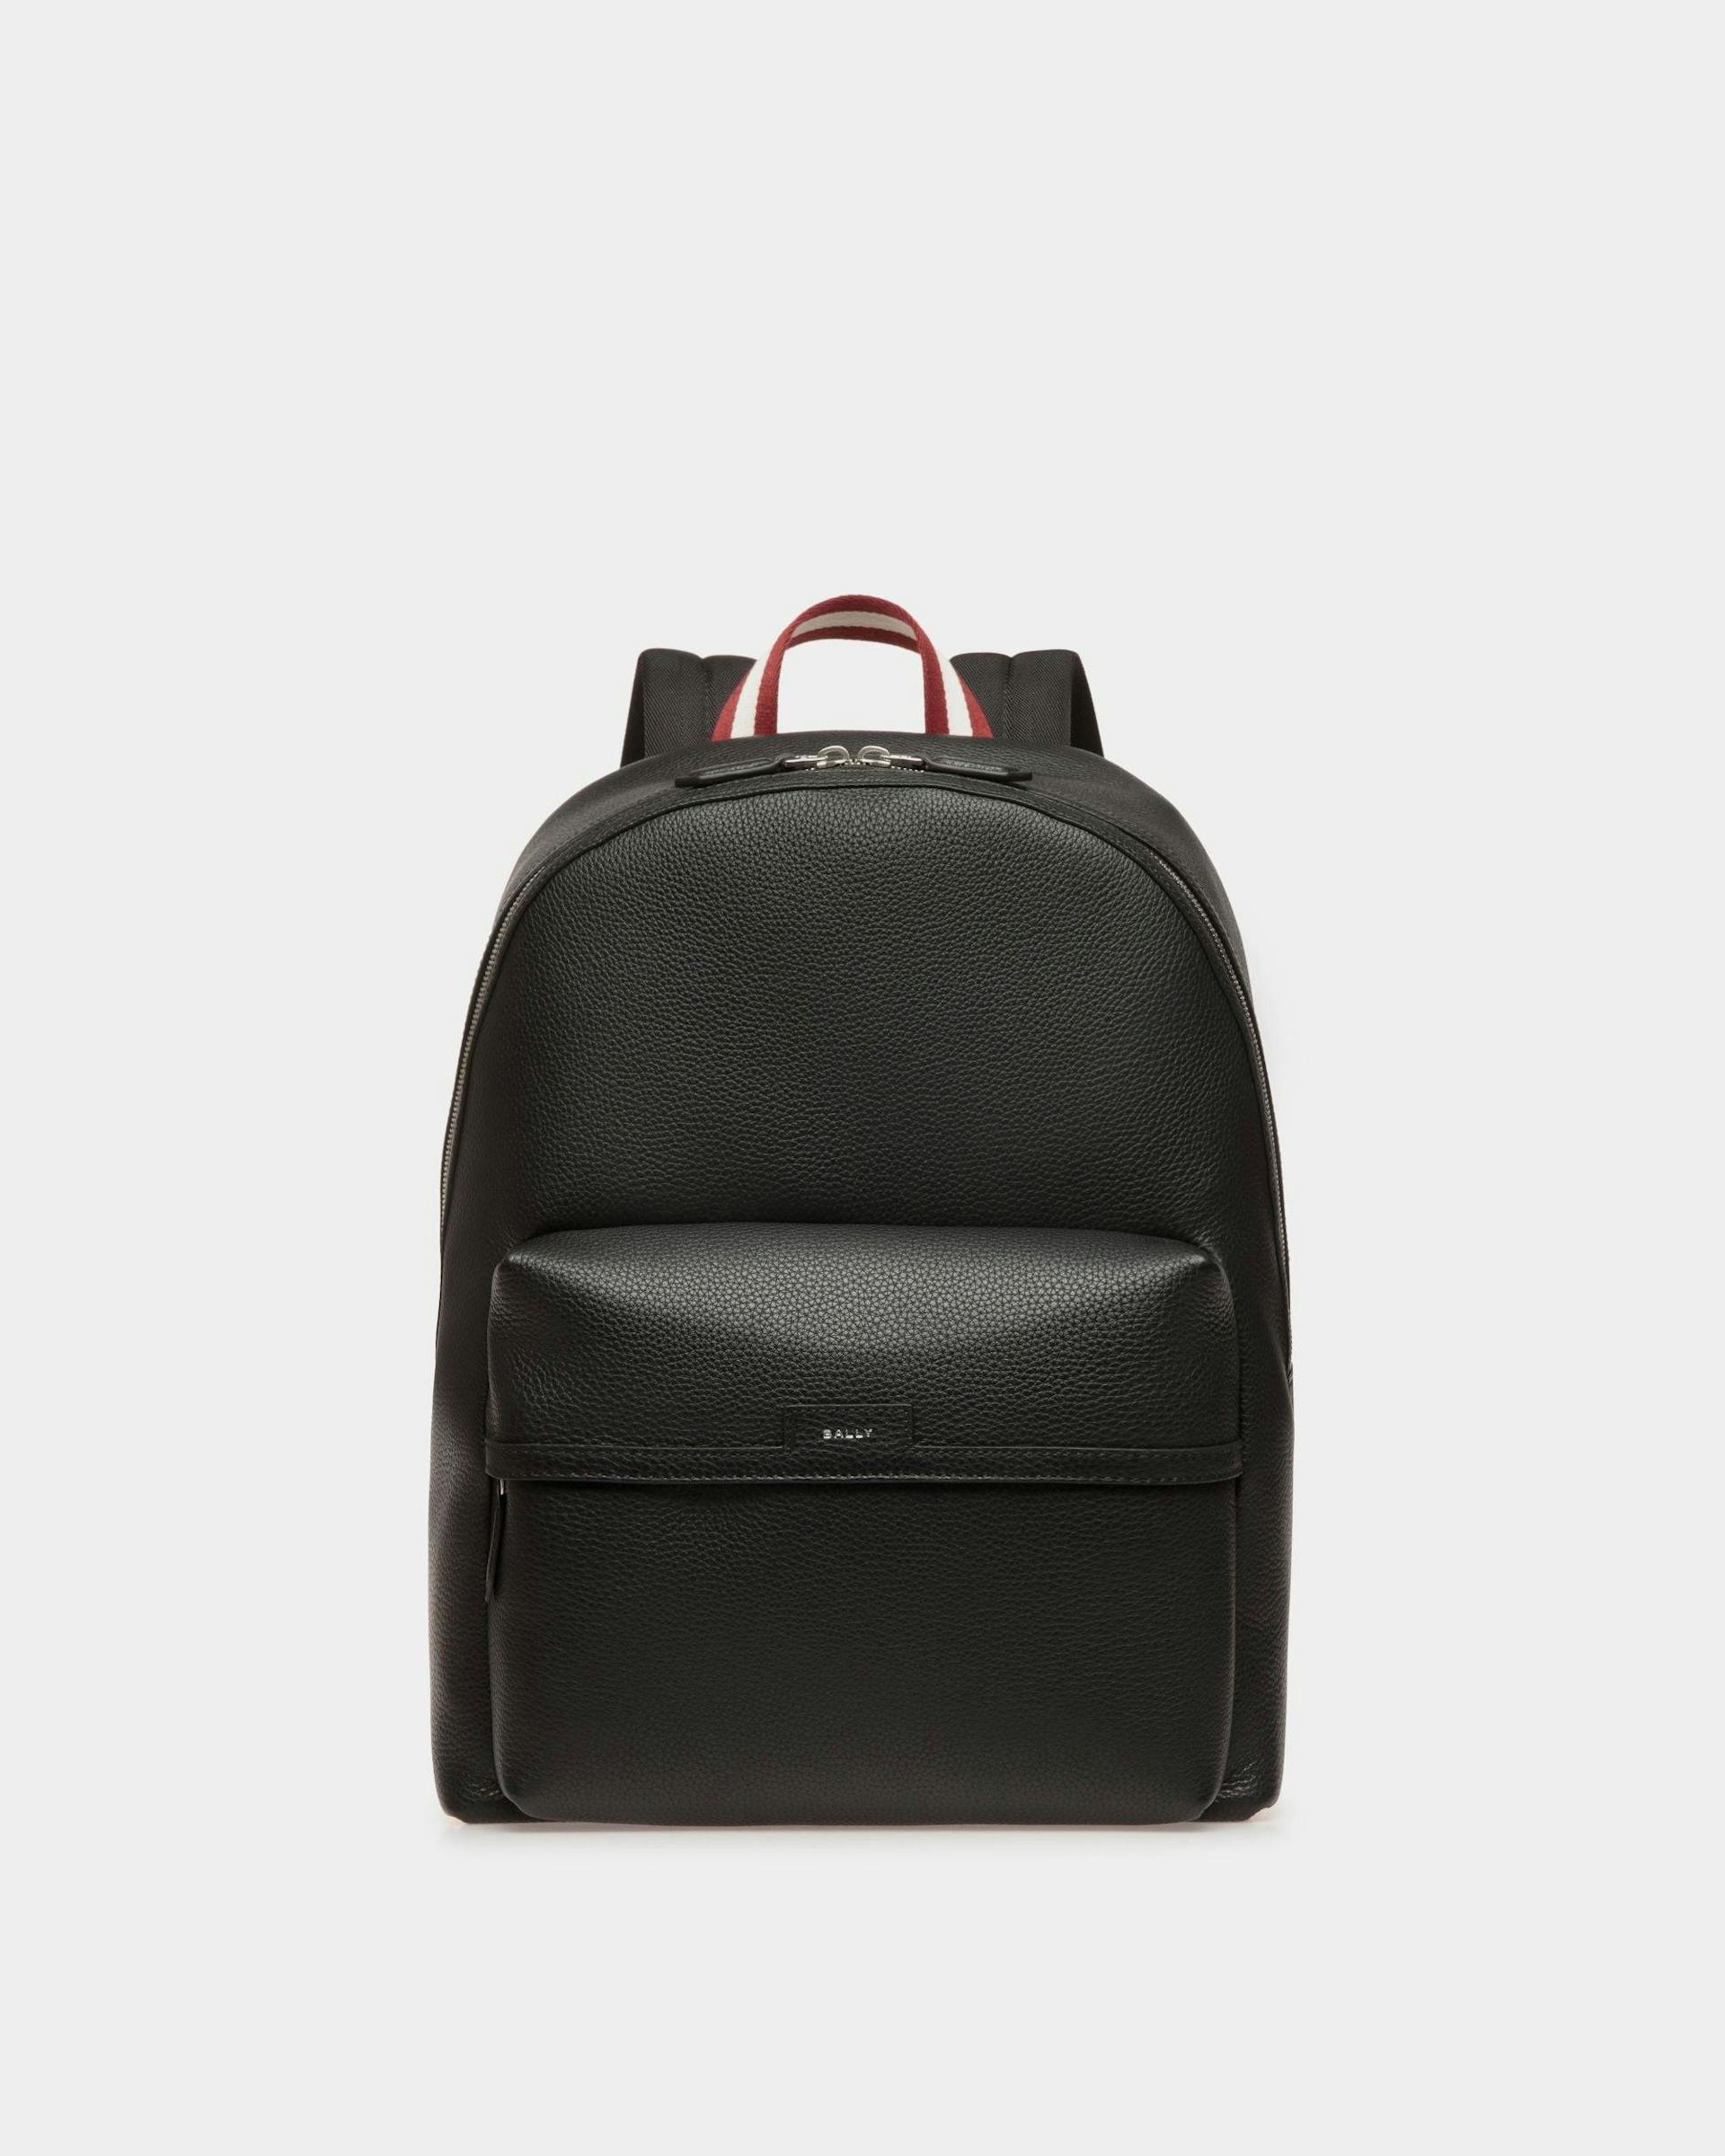 Men's Code Backpack in Black Grained Leather | Bally | Still Life Front